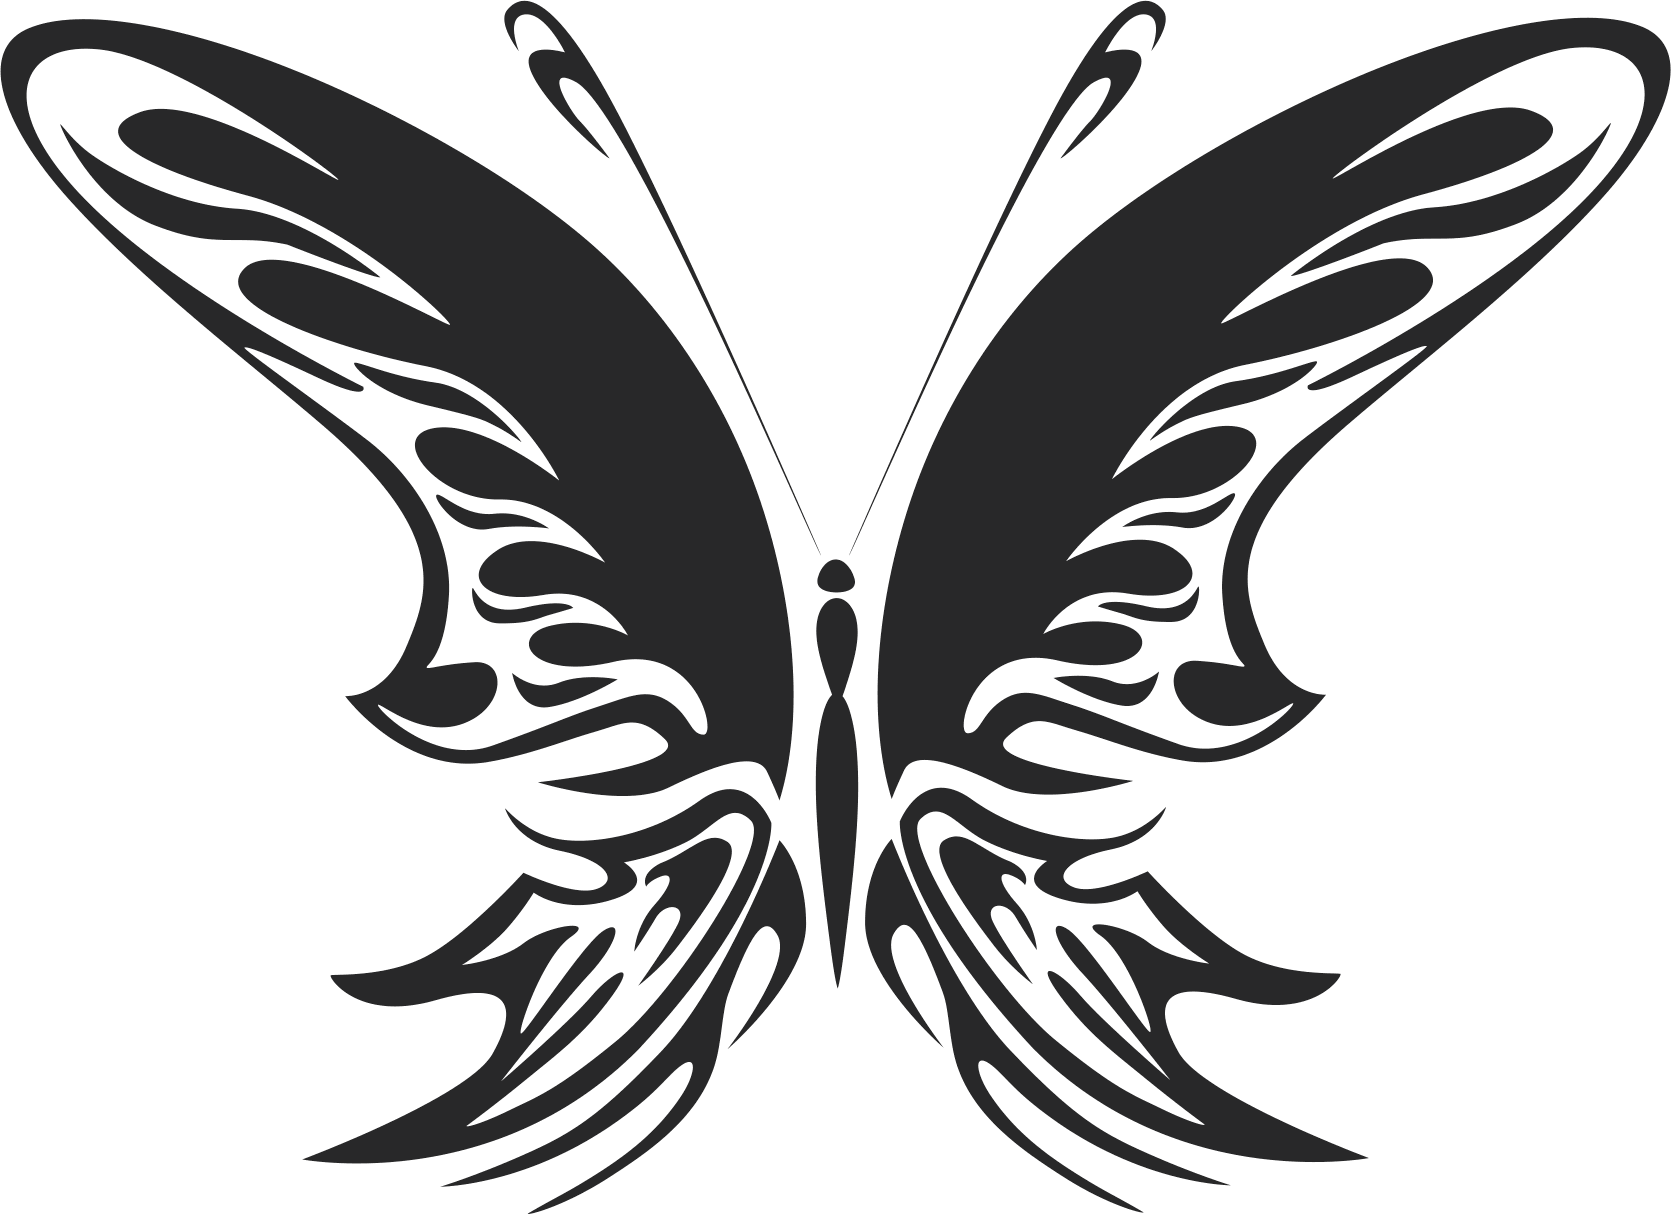 Download Tribal Butterfly Vector Art 22 DXF File Free Download - 3axis.co